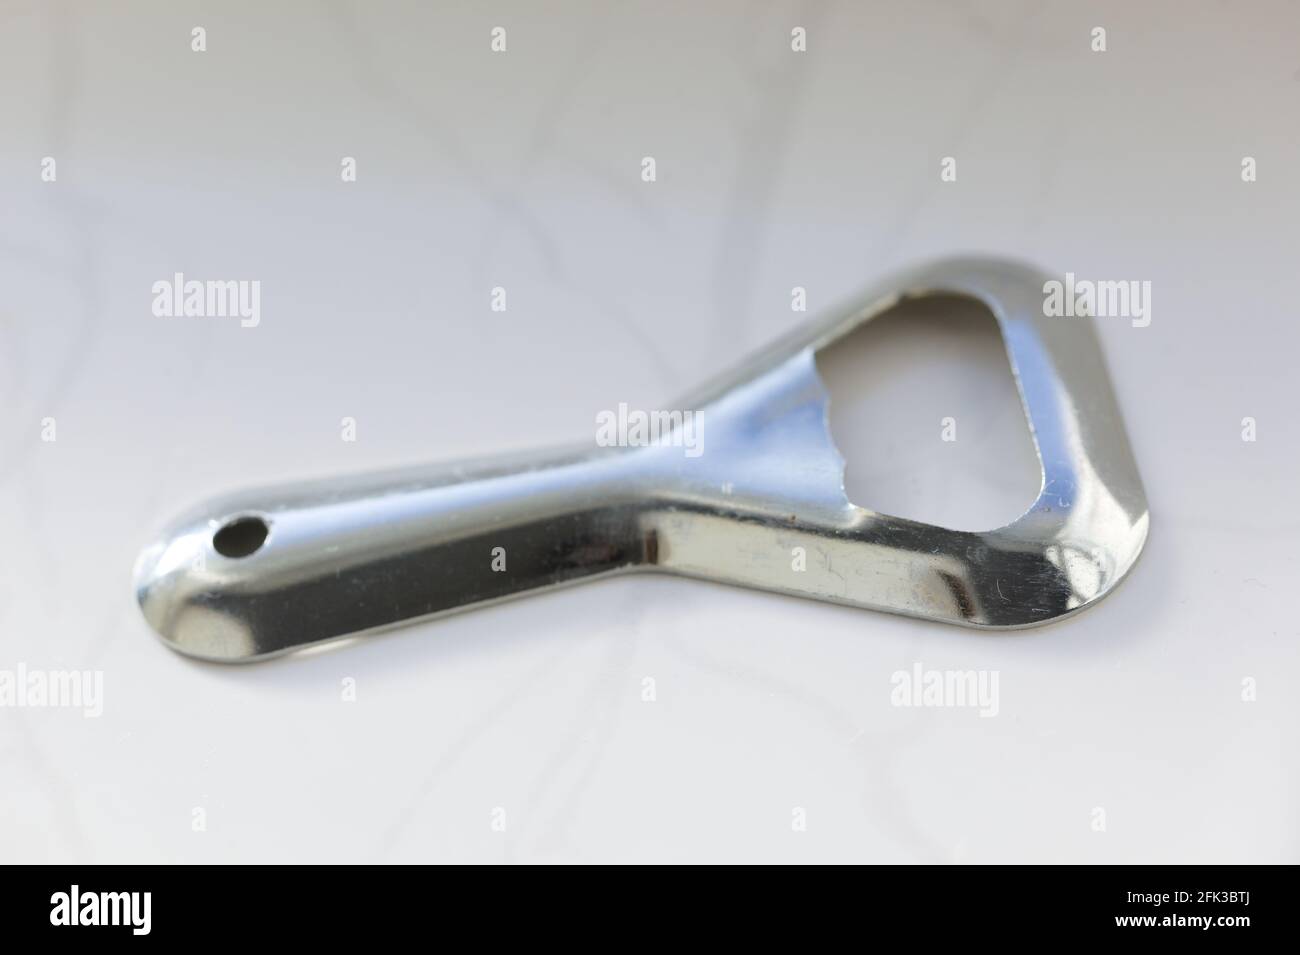 Close-up of an old metal bottle opener Stock Photo